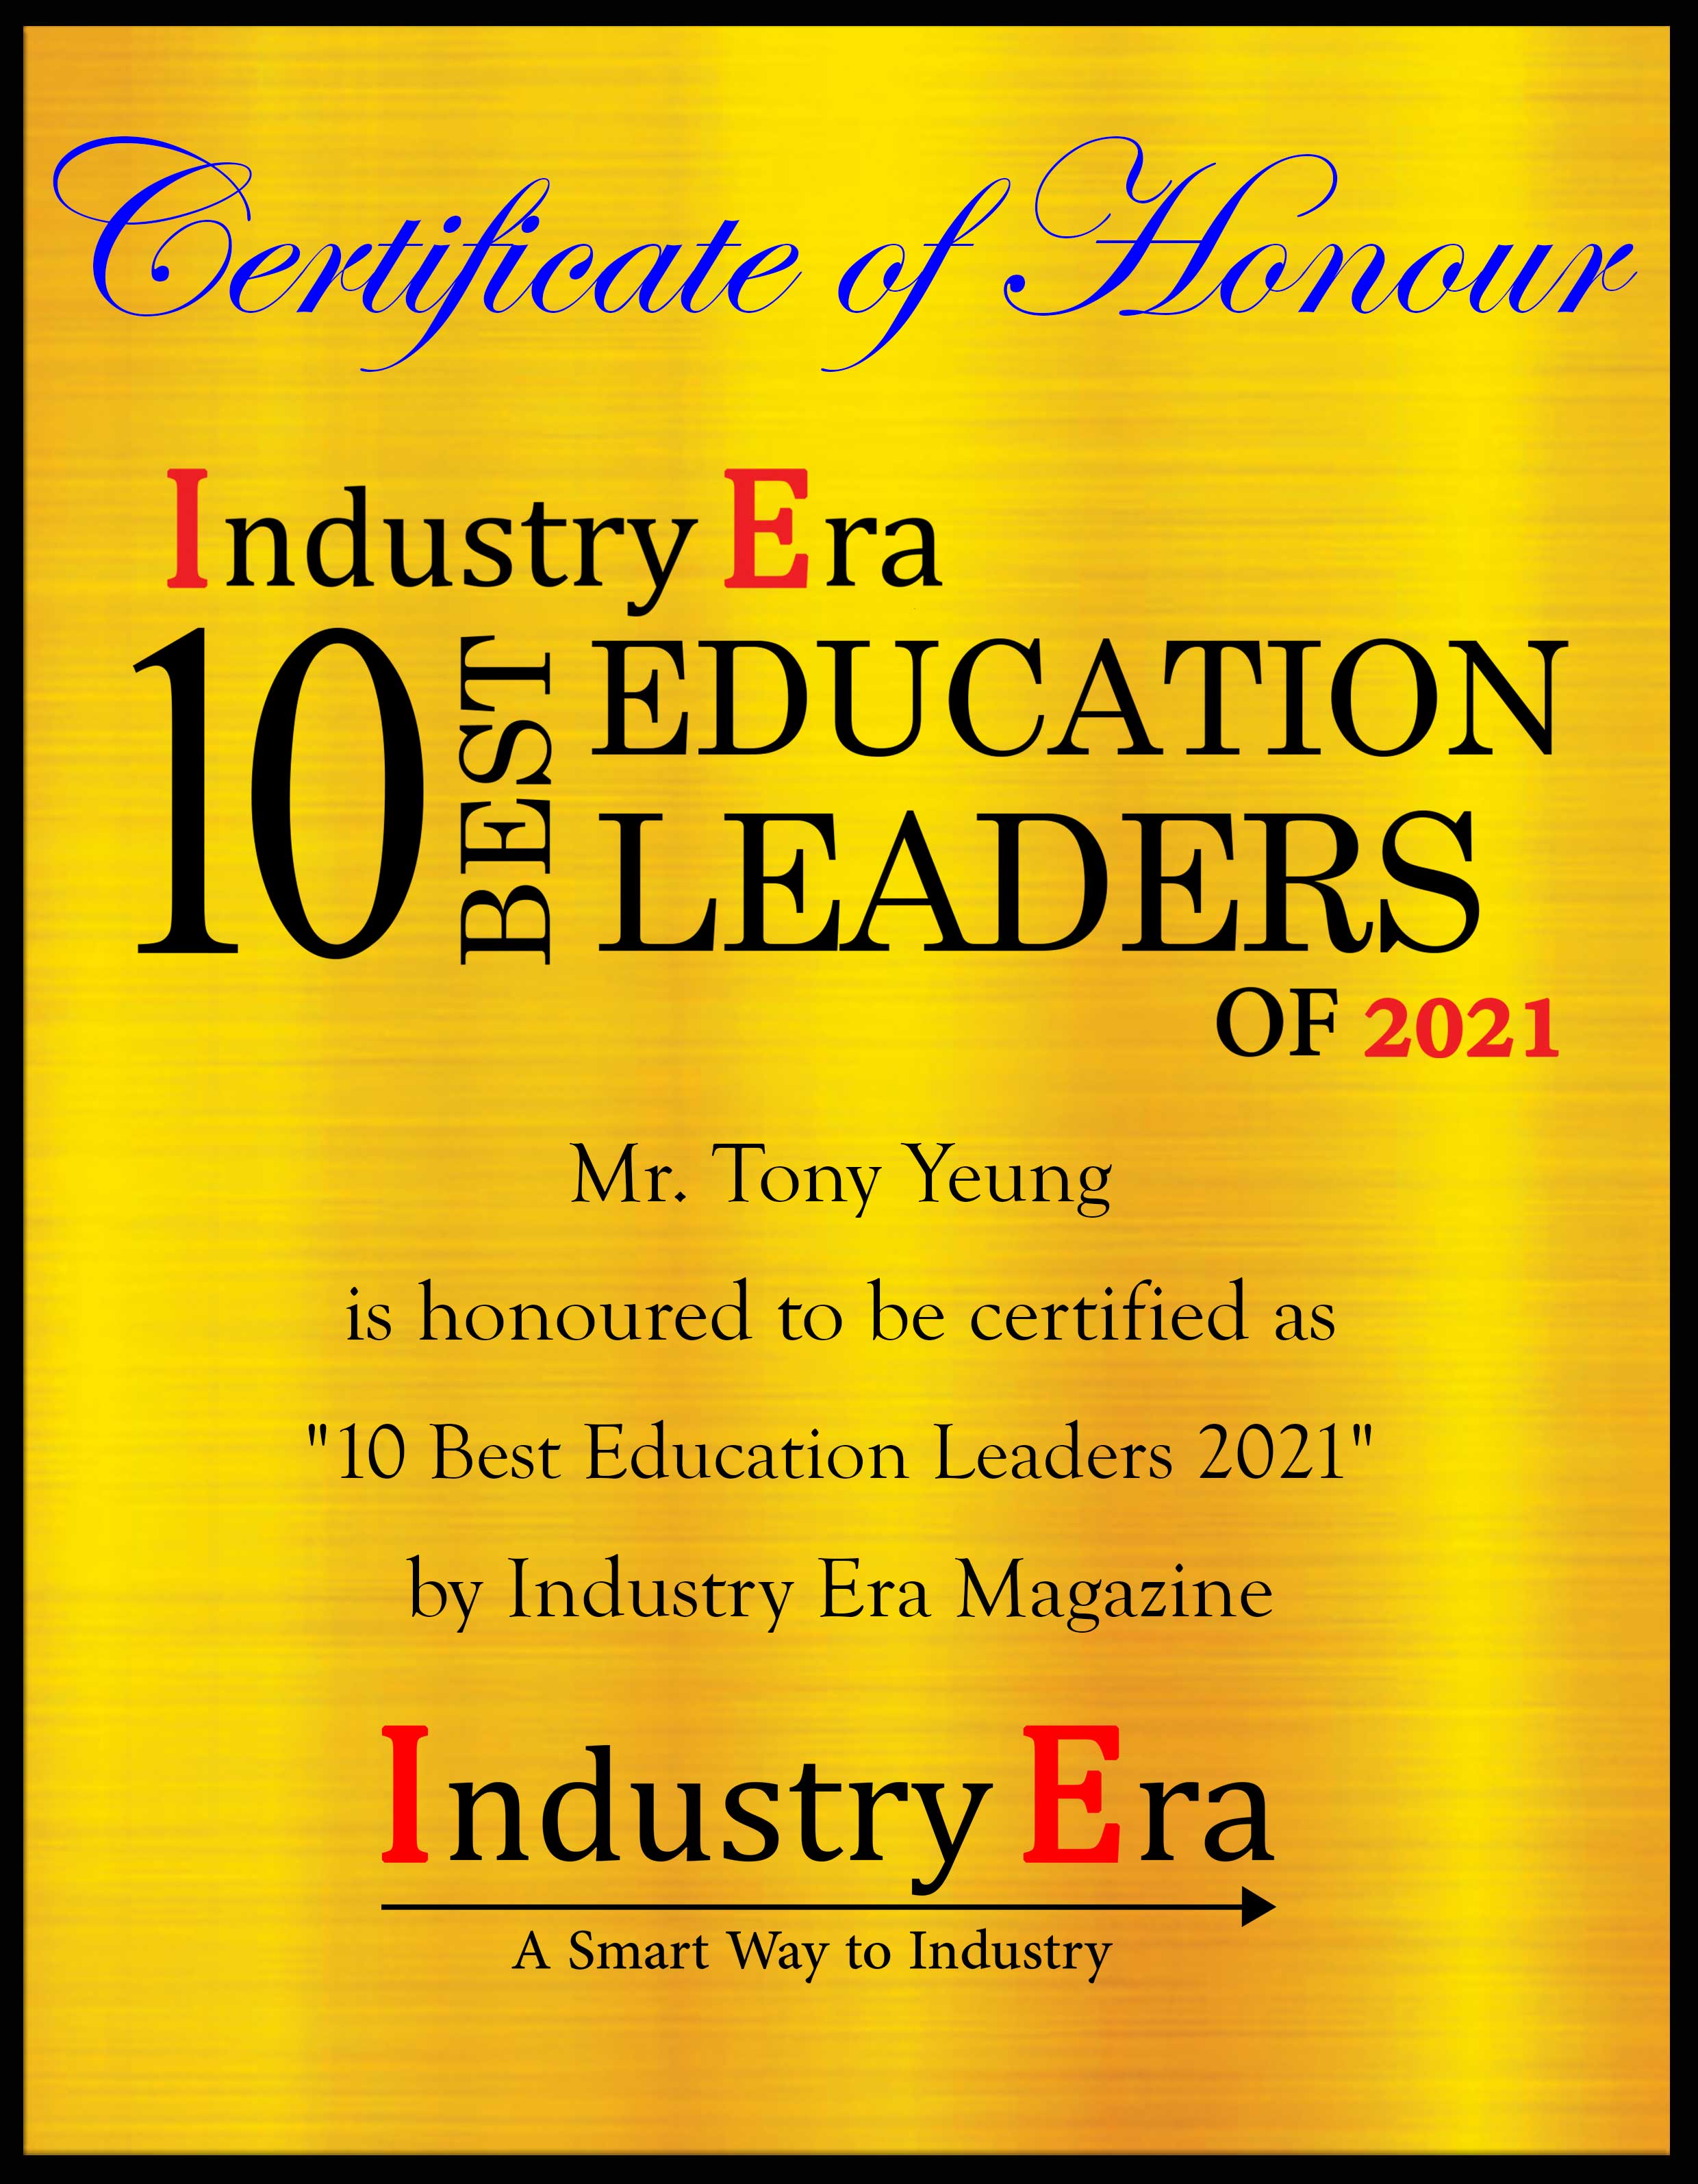 Mr. Tony Yeung, CEO of Danford College Certificate